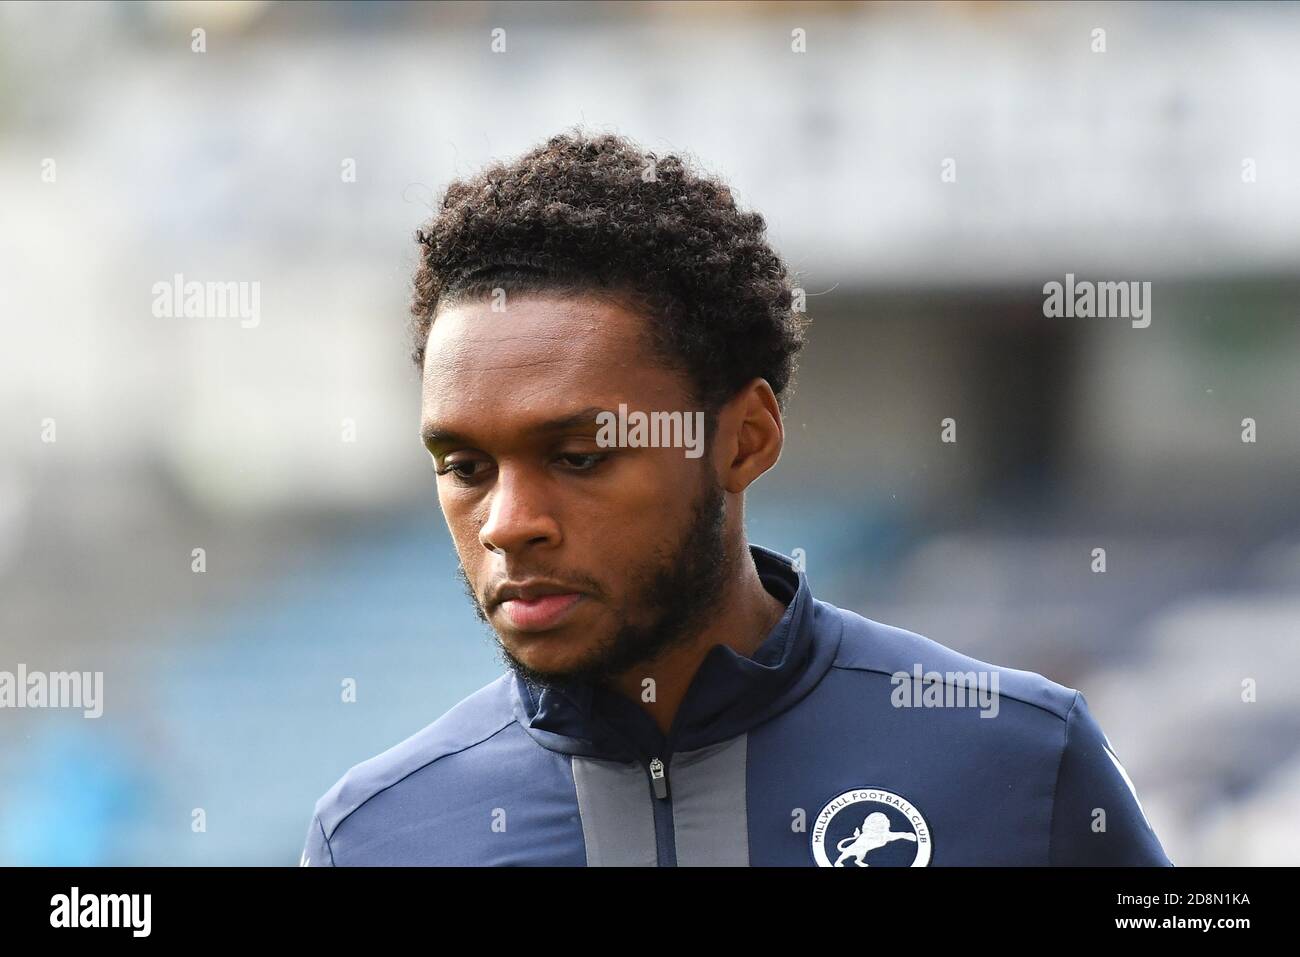 London, UK. 24th Oct, 2020. Mahlon Romeo of Millwall FC during the Sky Bet  Championship match played behind closed doors due to government Covid-19  guidelines between Millwall and Barnsley at The Den